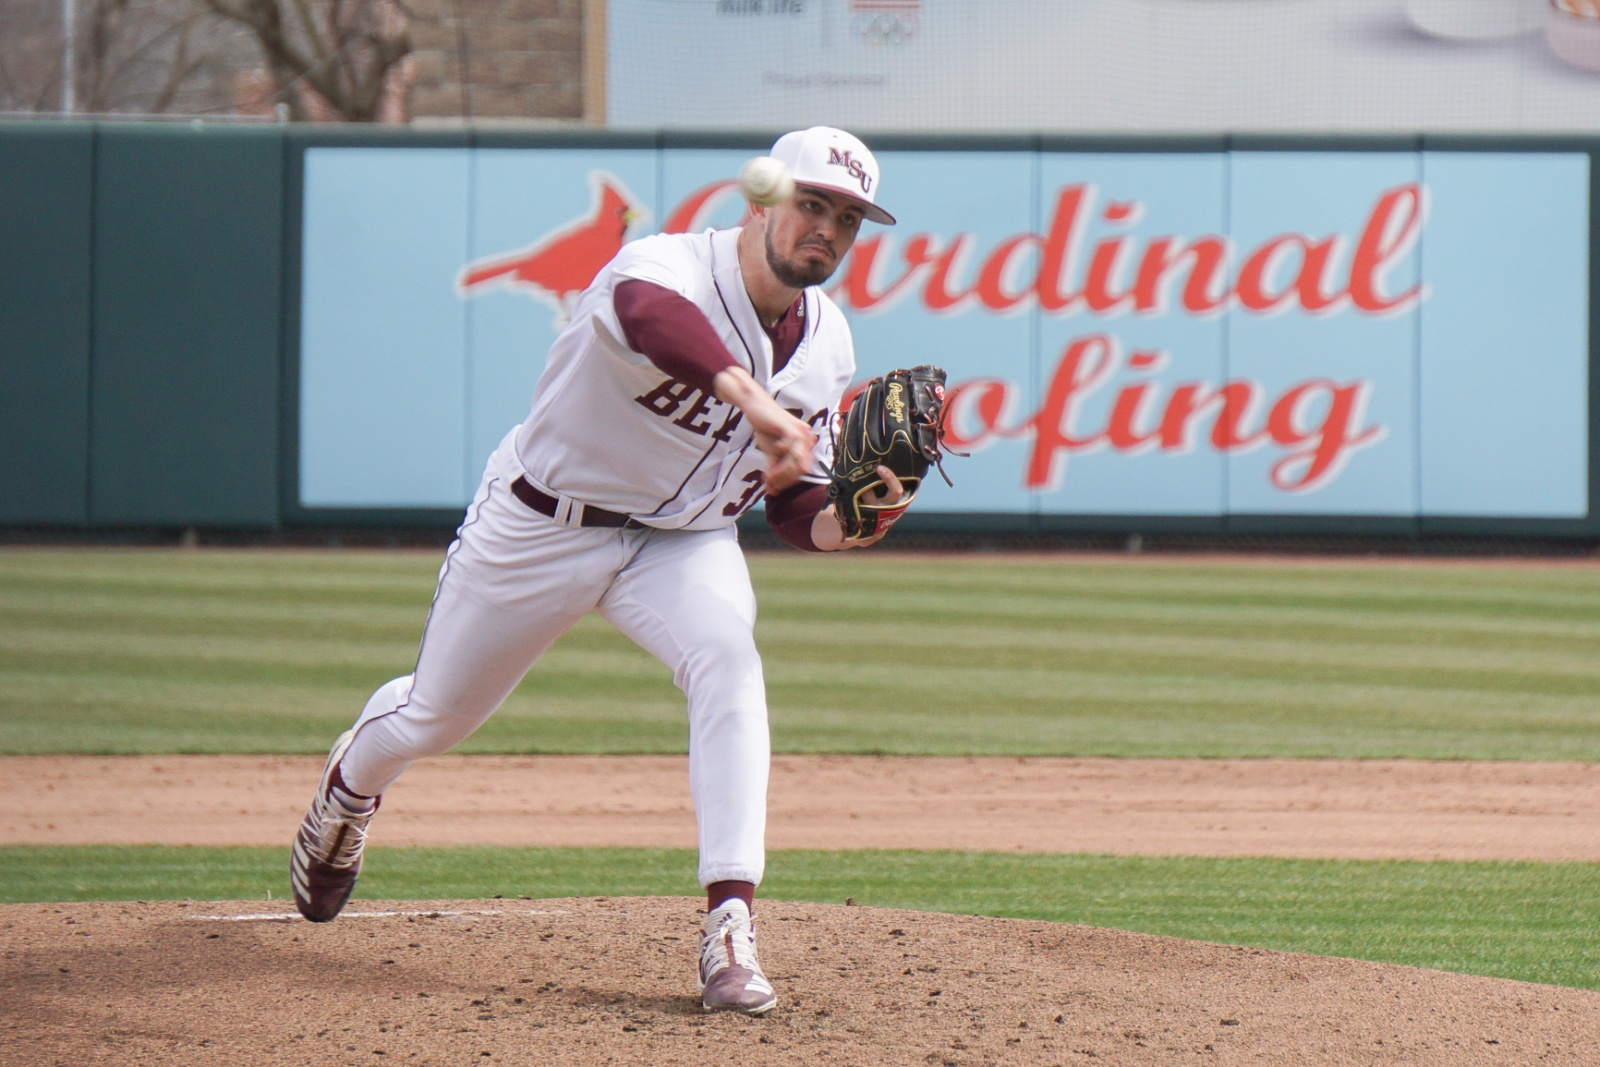 Forrest Barnes, wearing a Missouri State baseball uniform, pitches during a game at Hammons Field